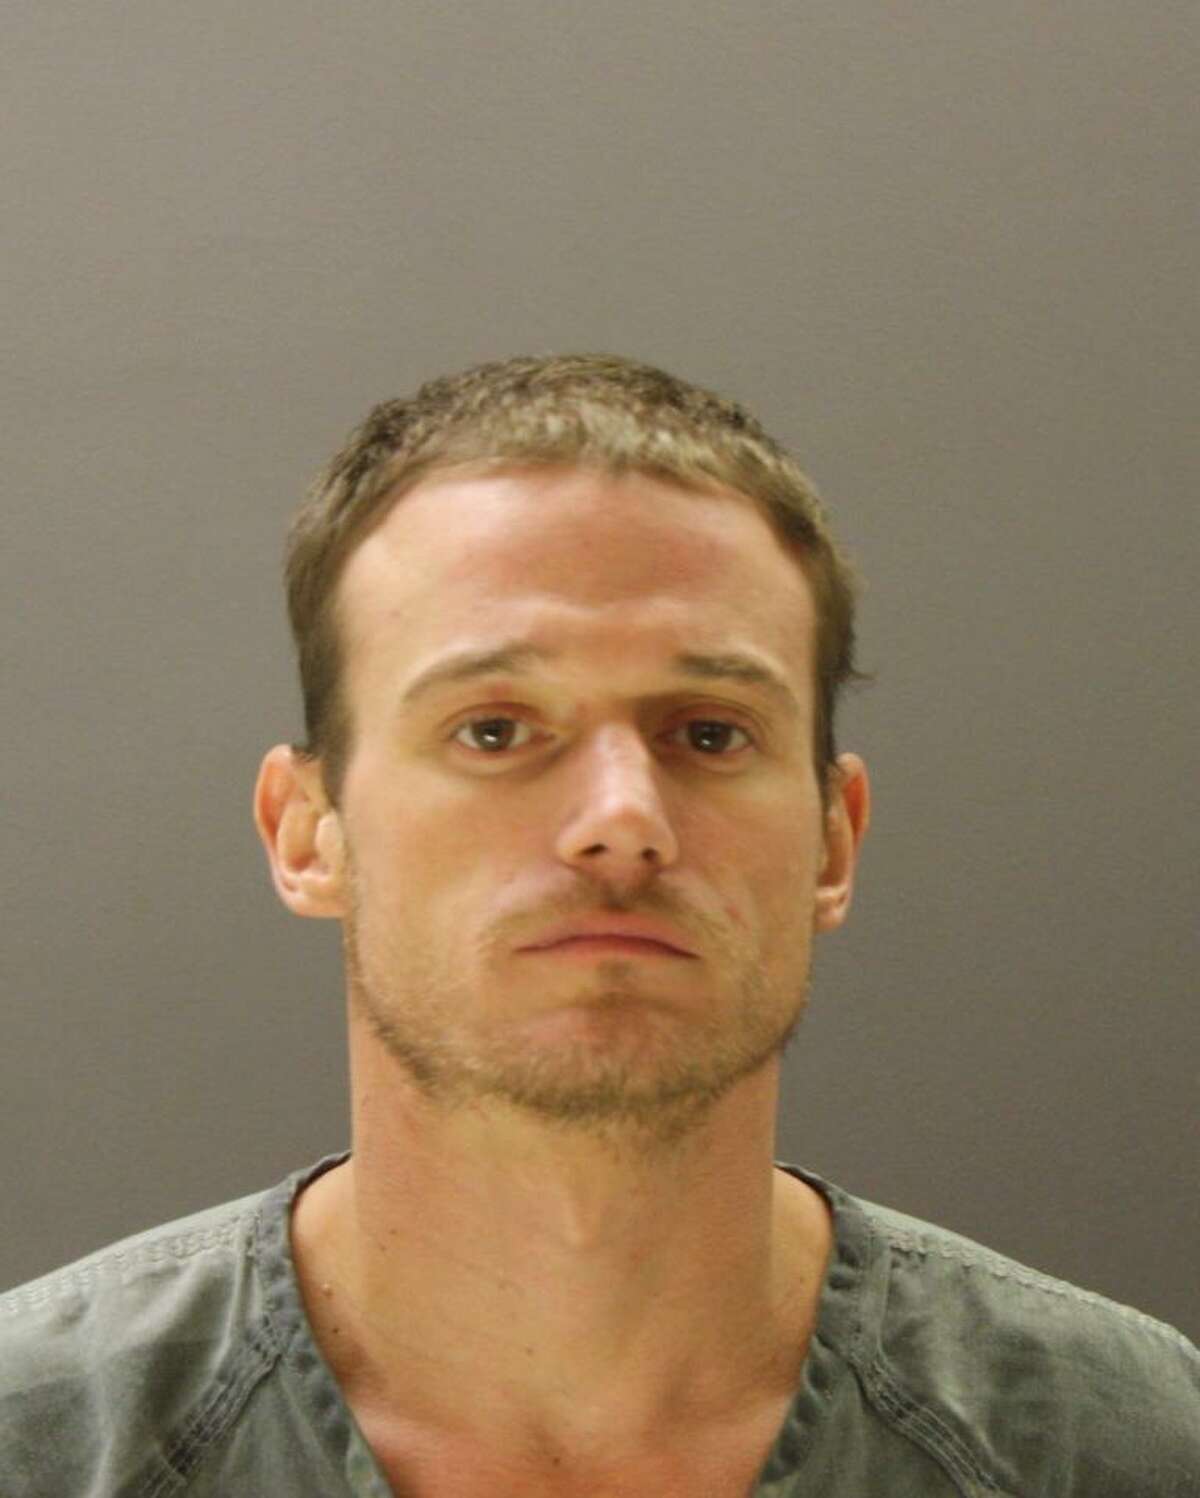 Justin Warren, 31, was charged with aggravated assault with a deadly weapon. He was booked into the Dallas County Jail, where he remained Friday on a $200,000 bond.